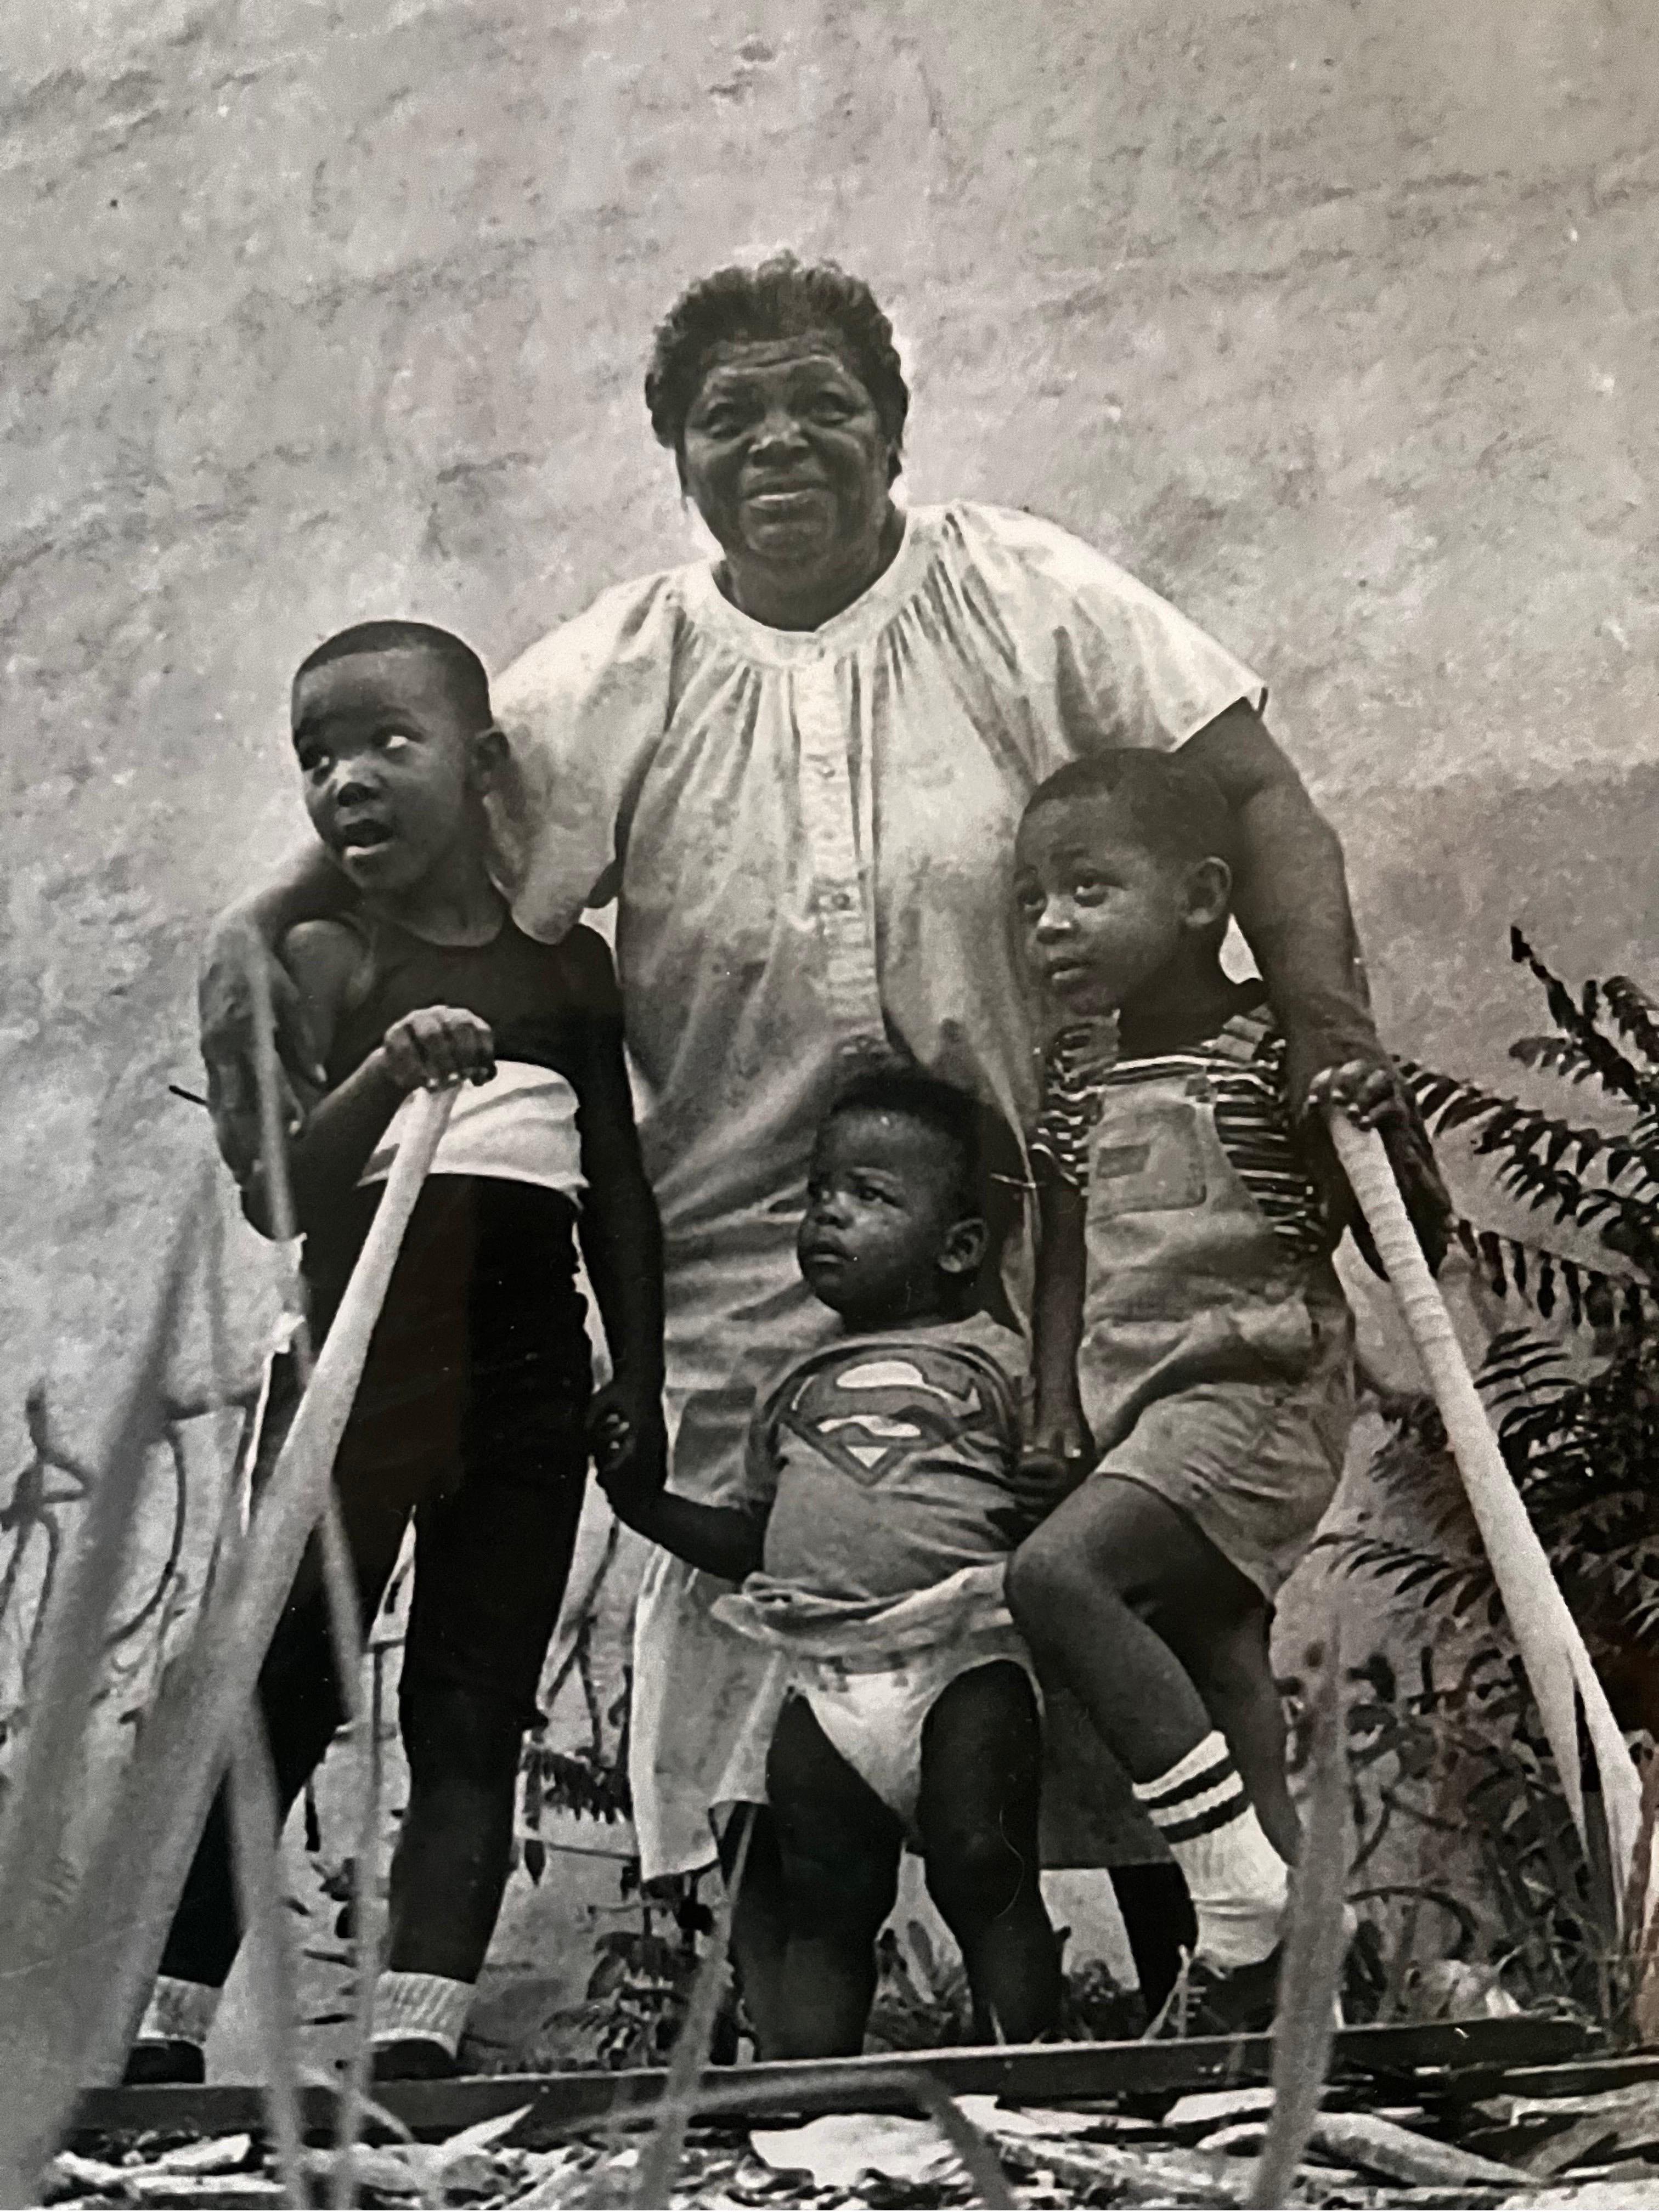 Black and White photo of African American Mother and Children

Glossy Paper mounted on Foam Core
Overall size = 18